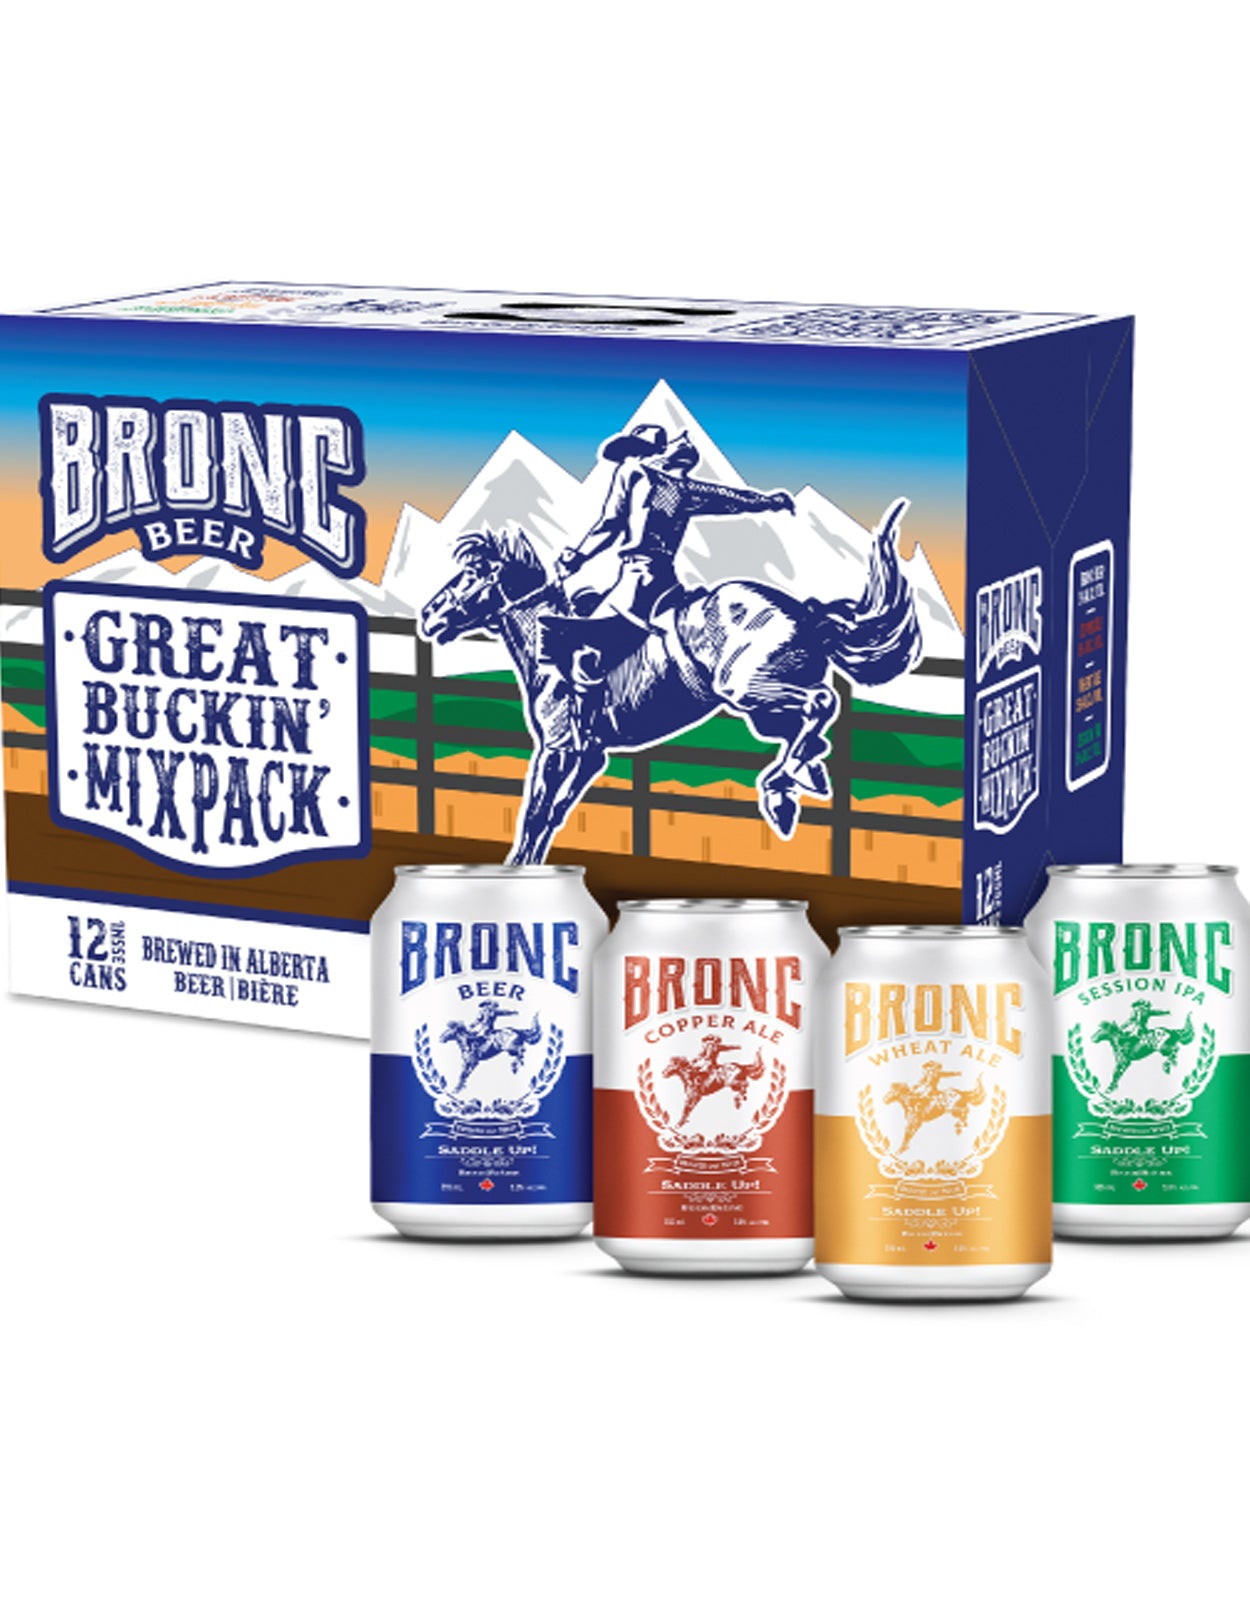 Bronc Great Buckin' Mixpack 355 ml - 12 Cans